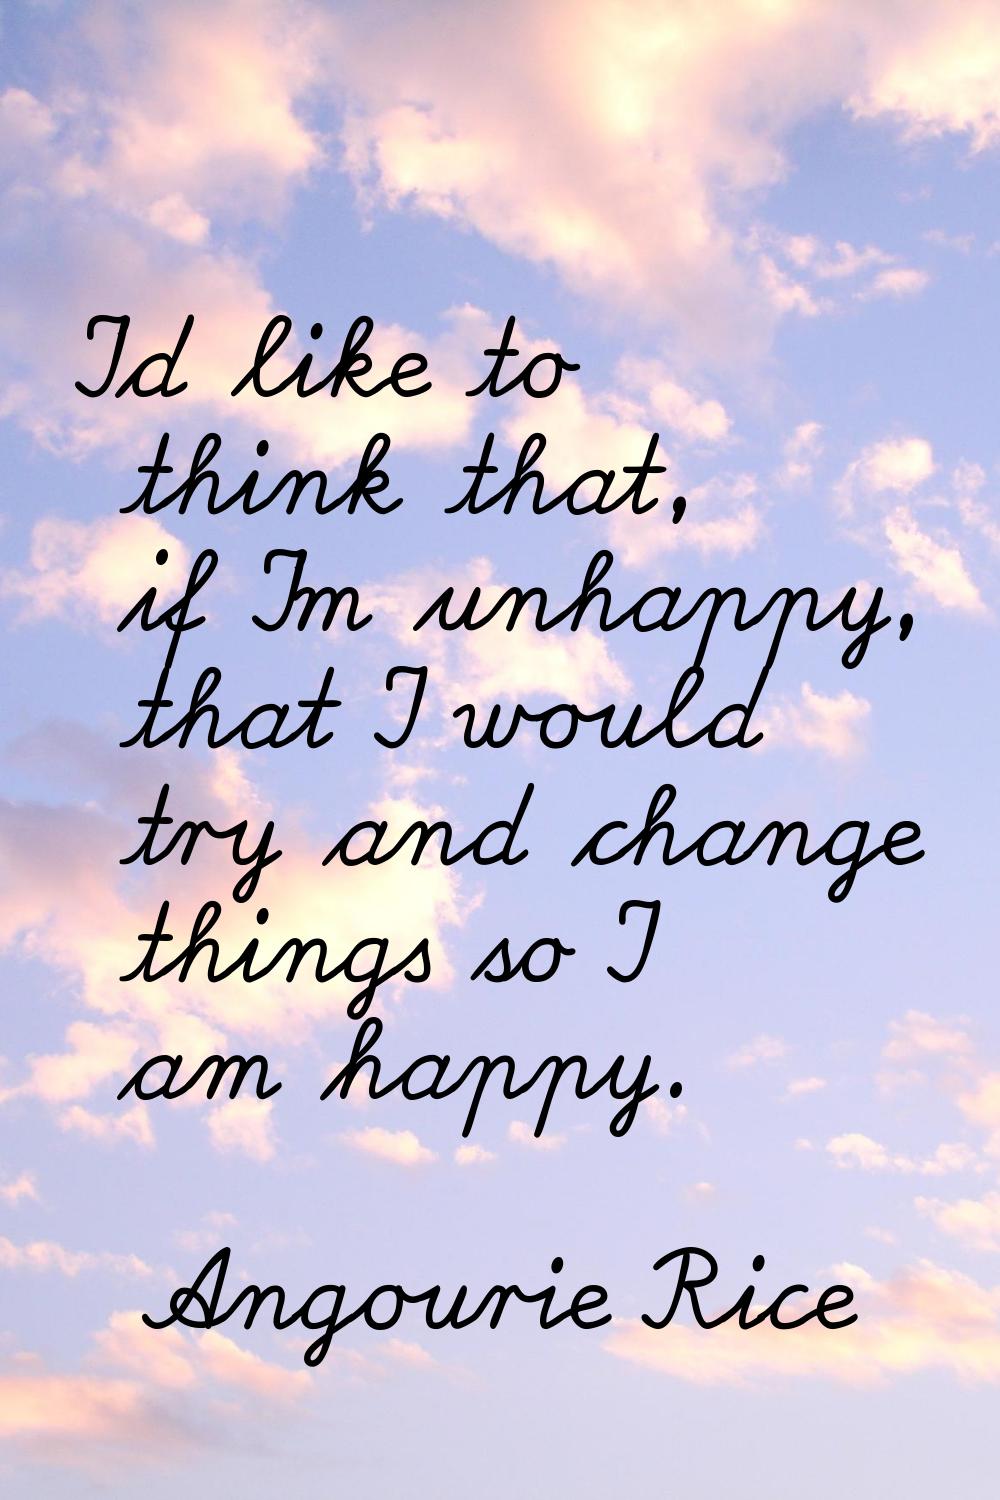 I'd like to think that, if I'm unhappy, that I would try and change things so I am happy.